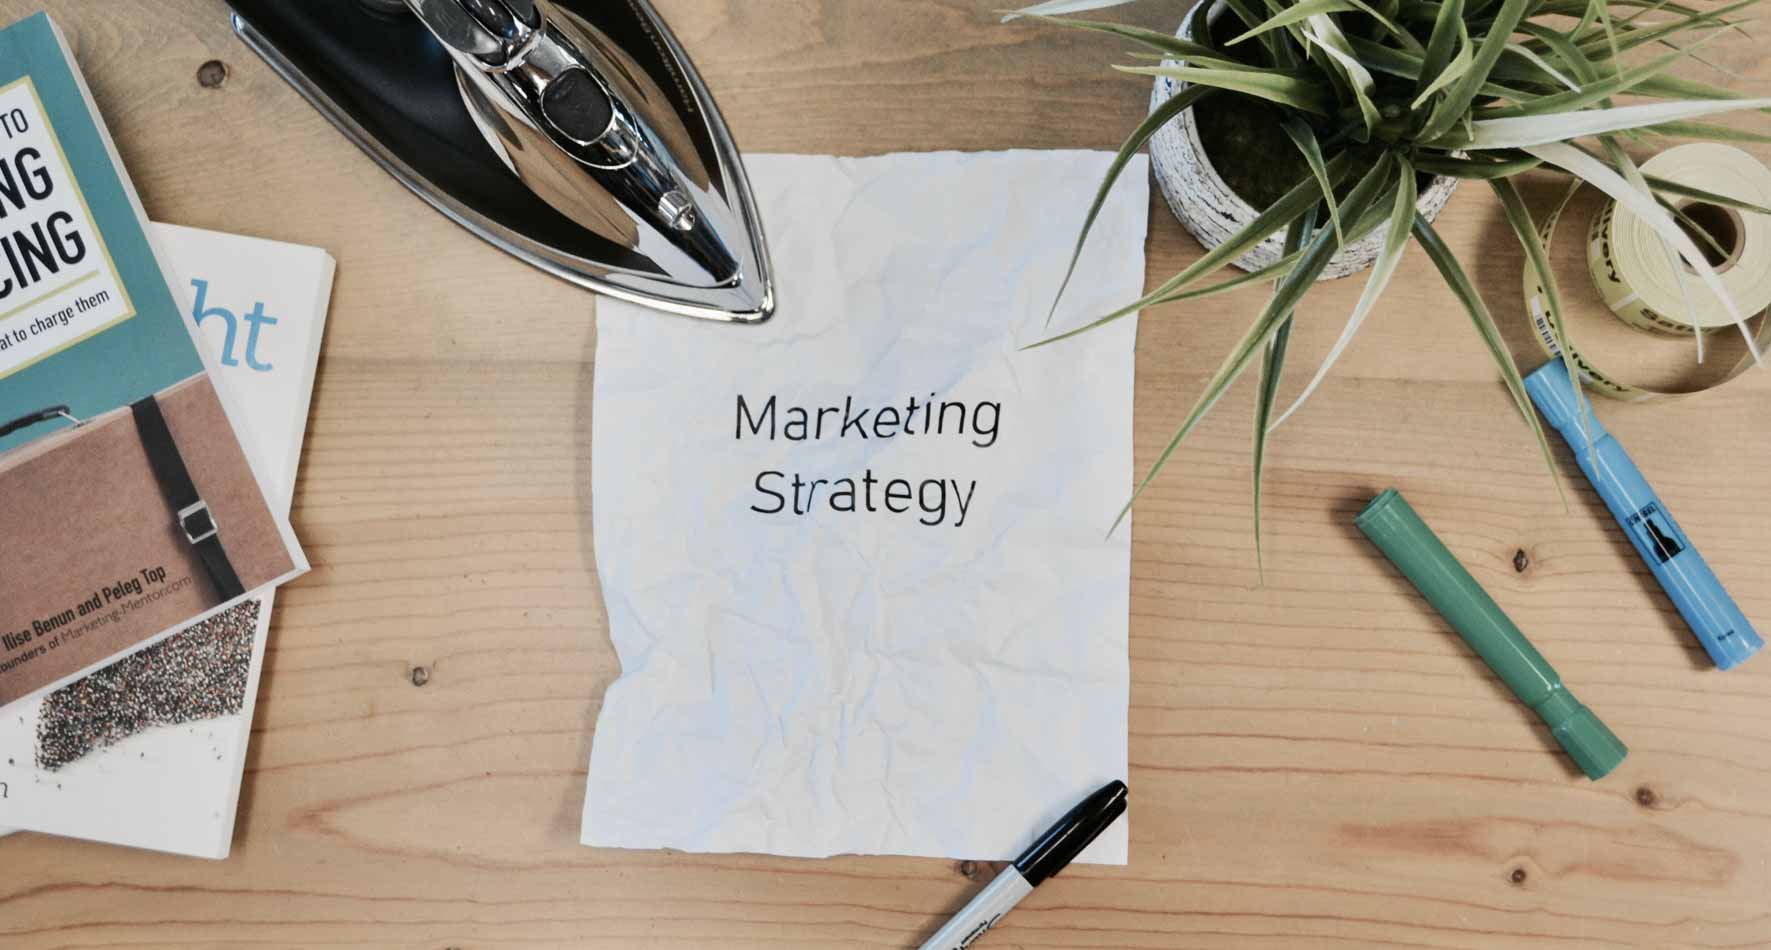 Image of a crumpled piece of paper with "Marketing Strategy" printed on it